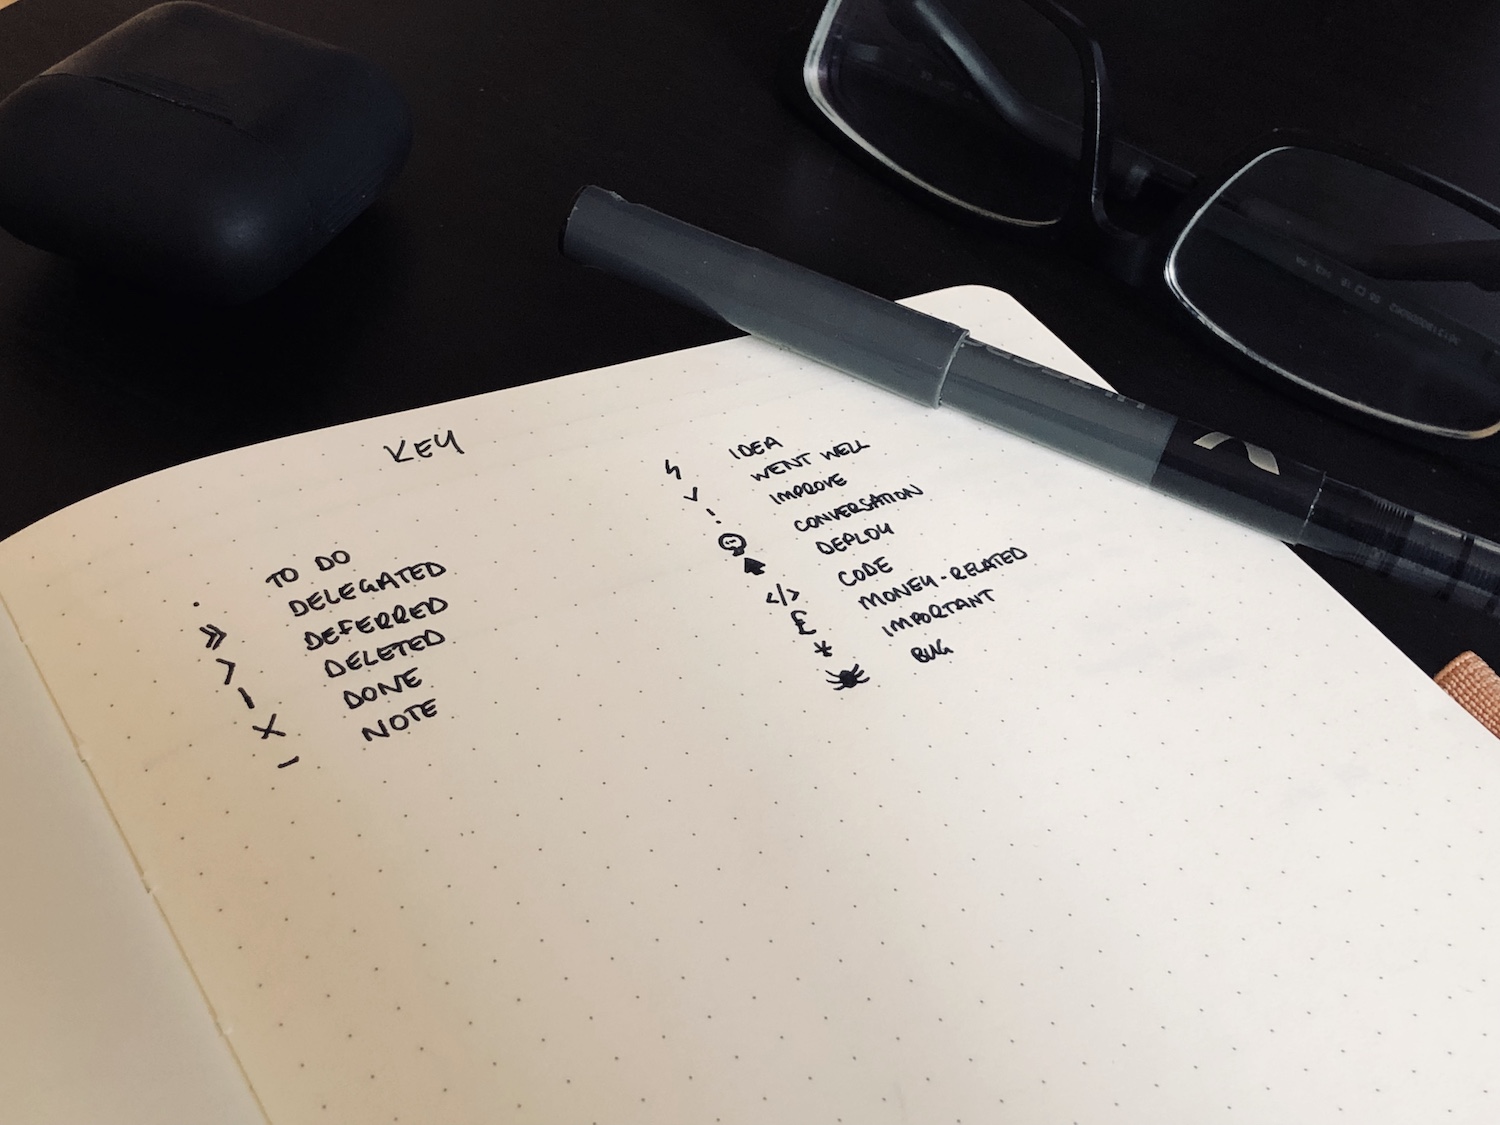 Picture showing my bullet journal keys and indicators